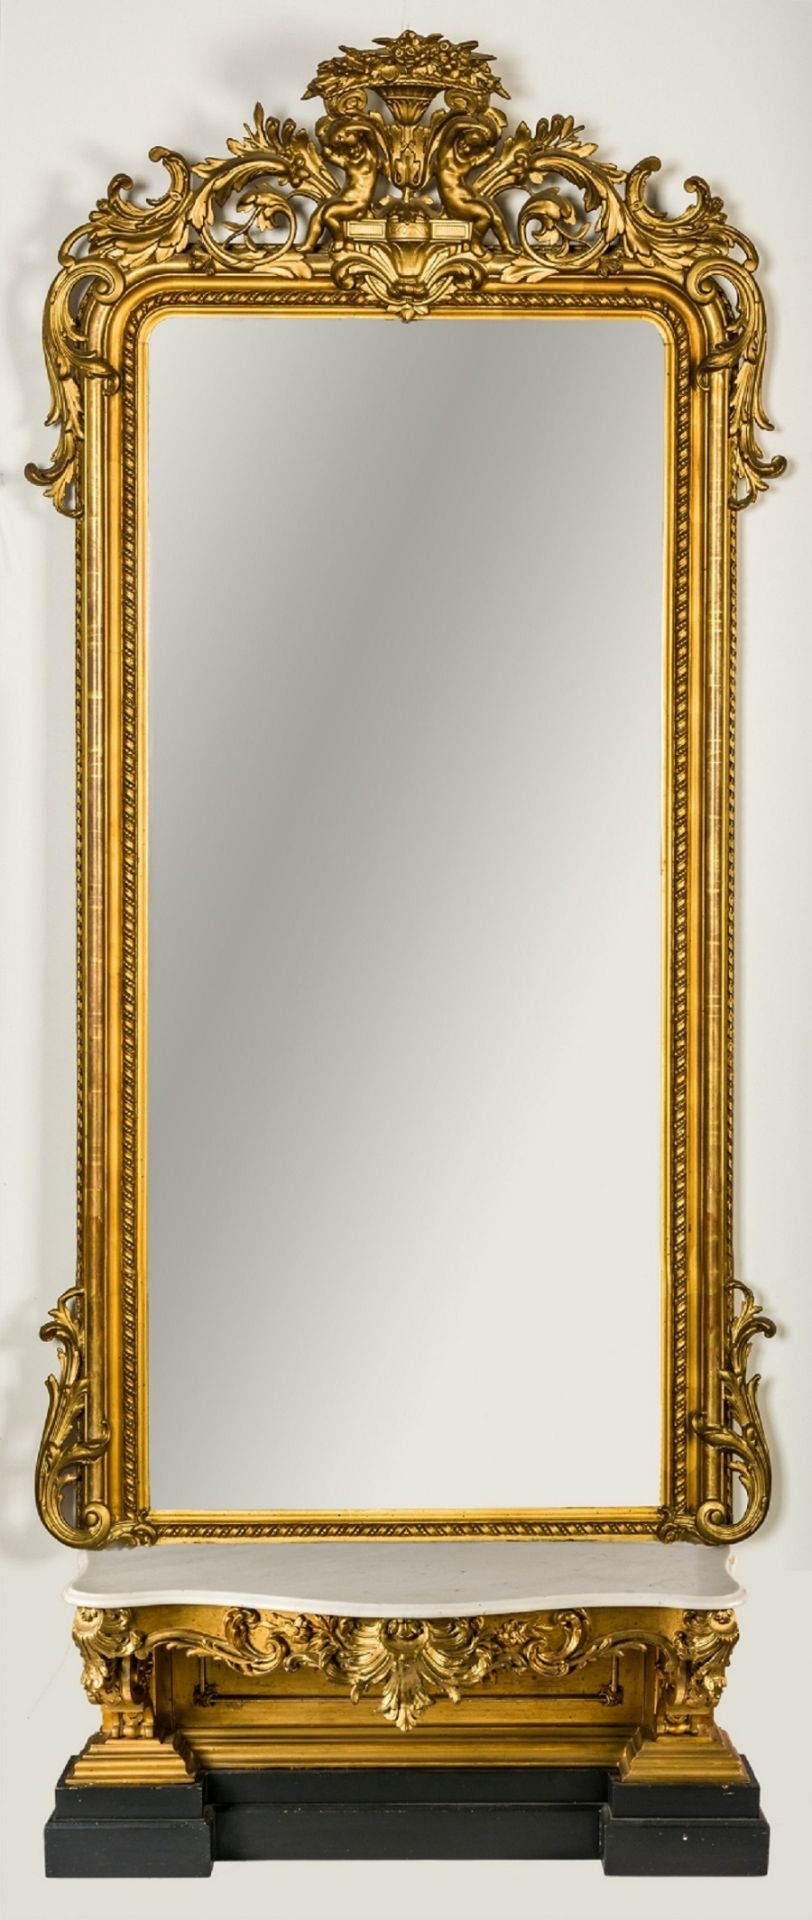 Monumental mirror with console, Sweden, wood, gilded, probably end of 19th century,height: ca. 245